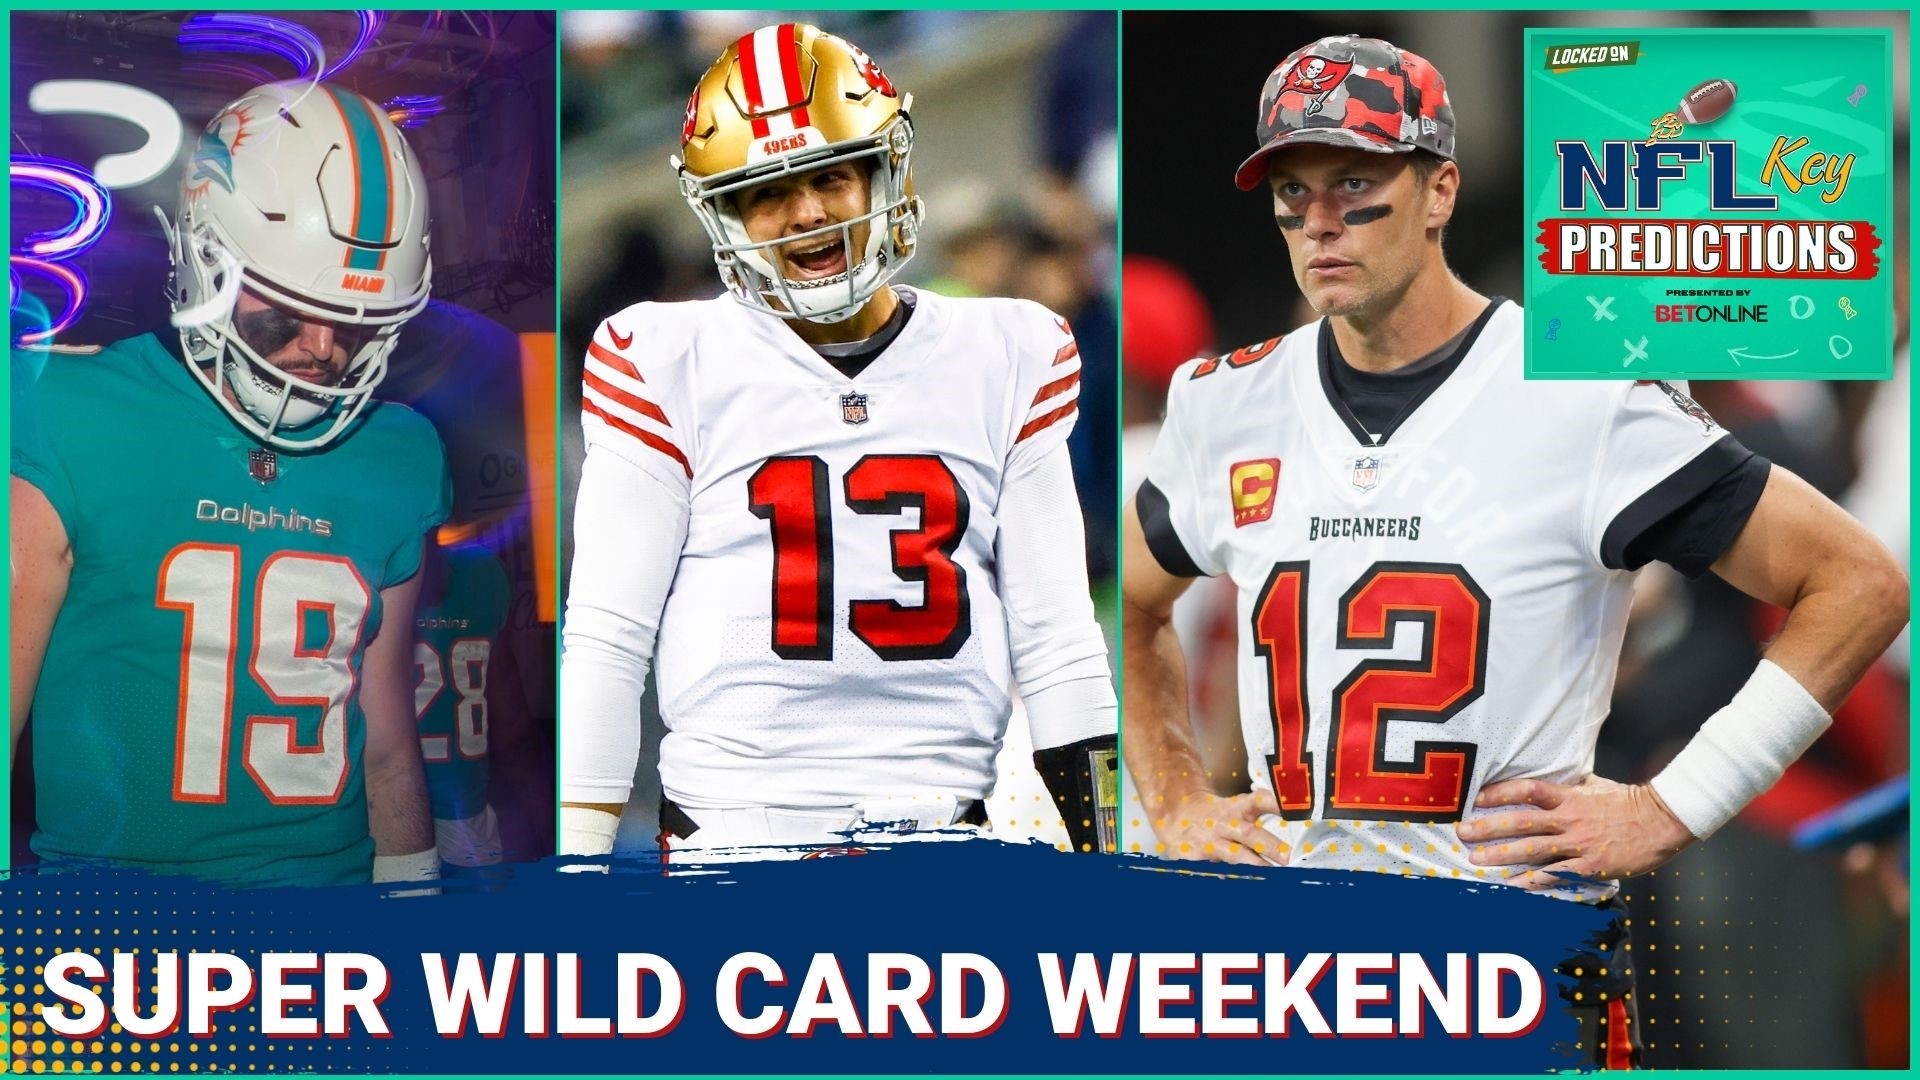 Locked On shares what to expect in the wild card games this weekend, as well as predict the wins and losses getting into NFL playoffs.